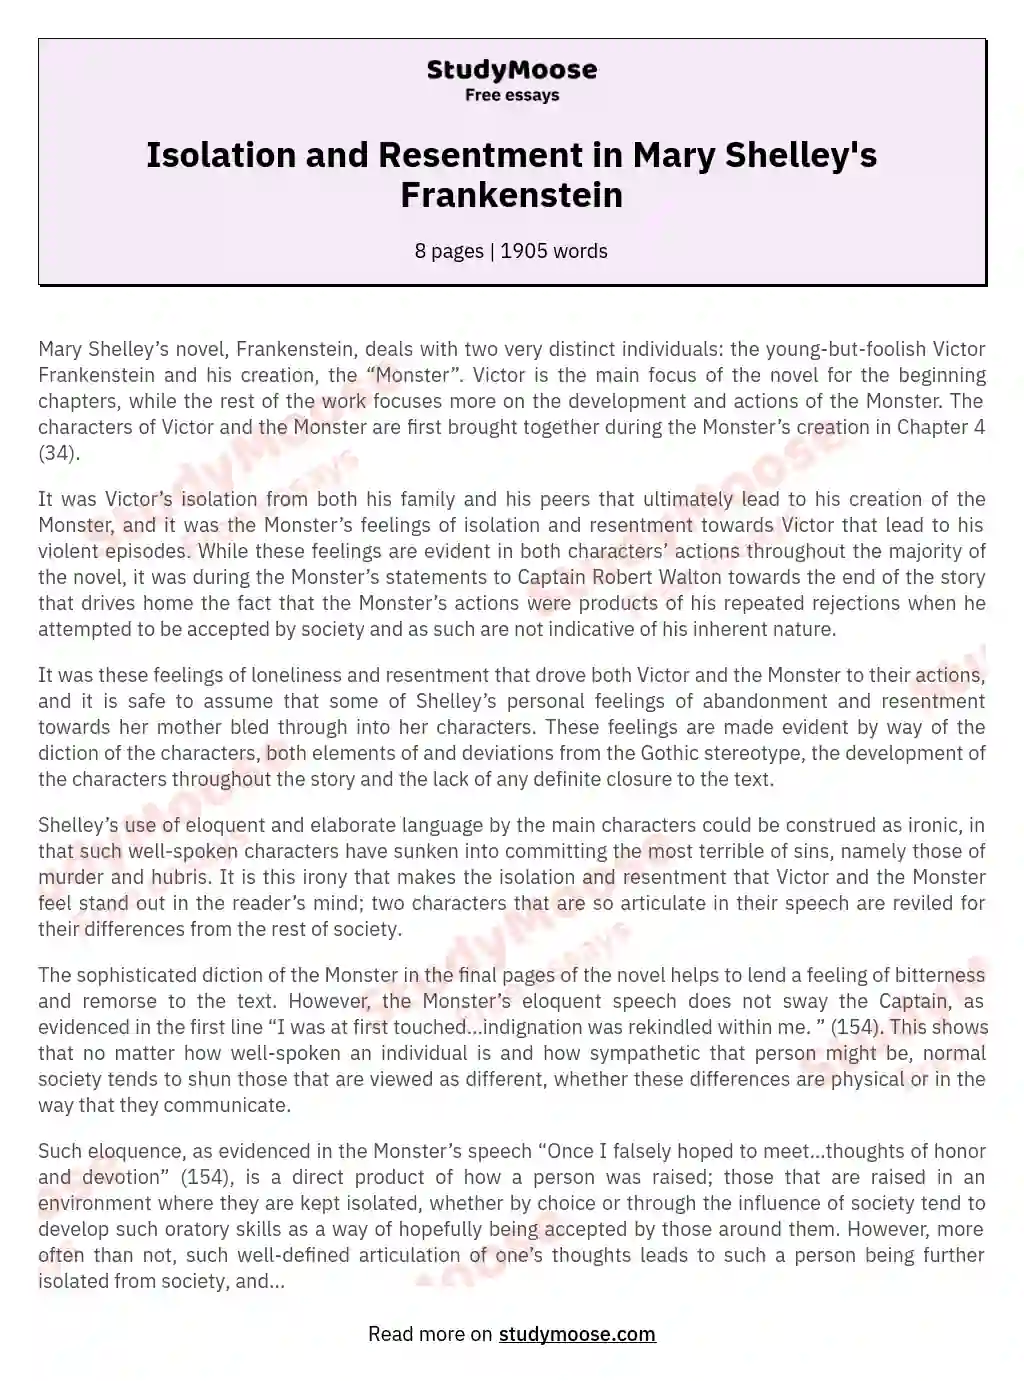 Isolation and Resentment in Mary Shelley's Frankenstein essay